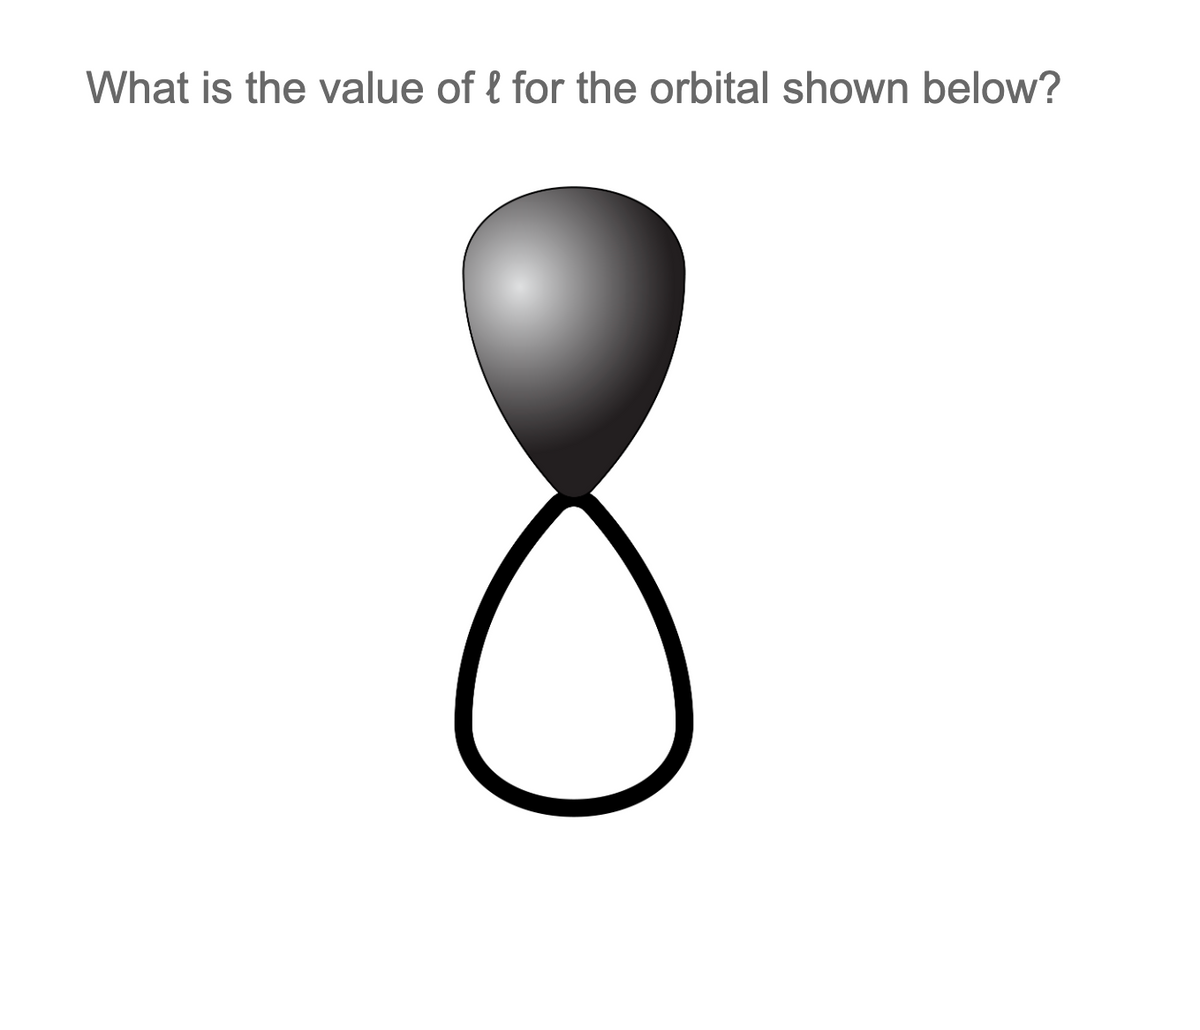 What is the value of l for the orbital shown below?